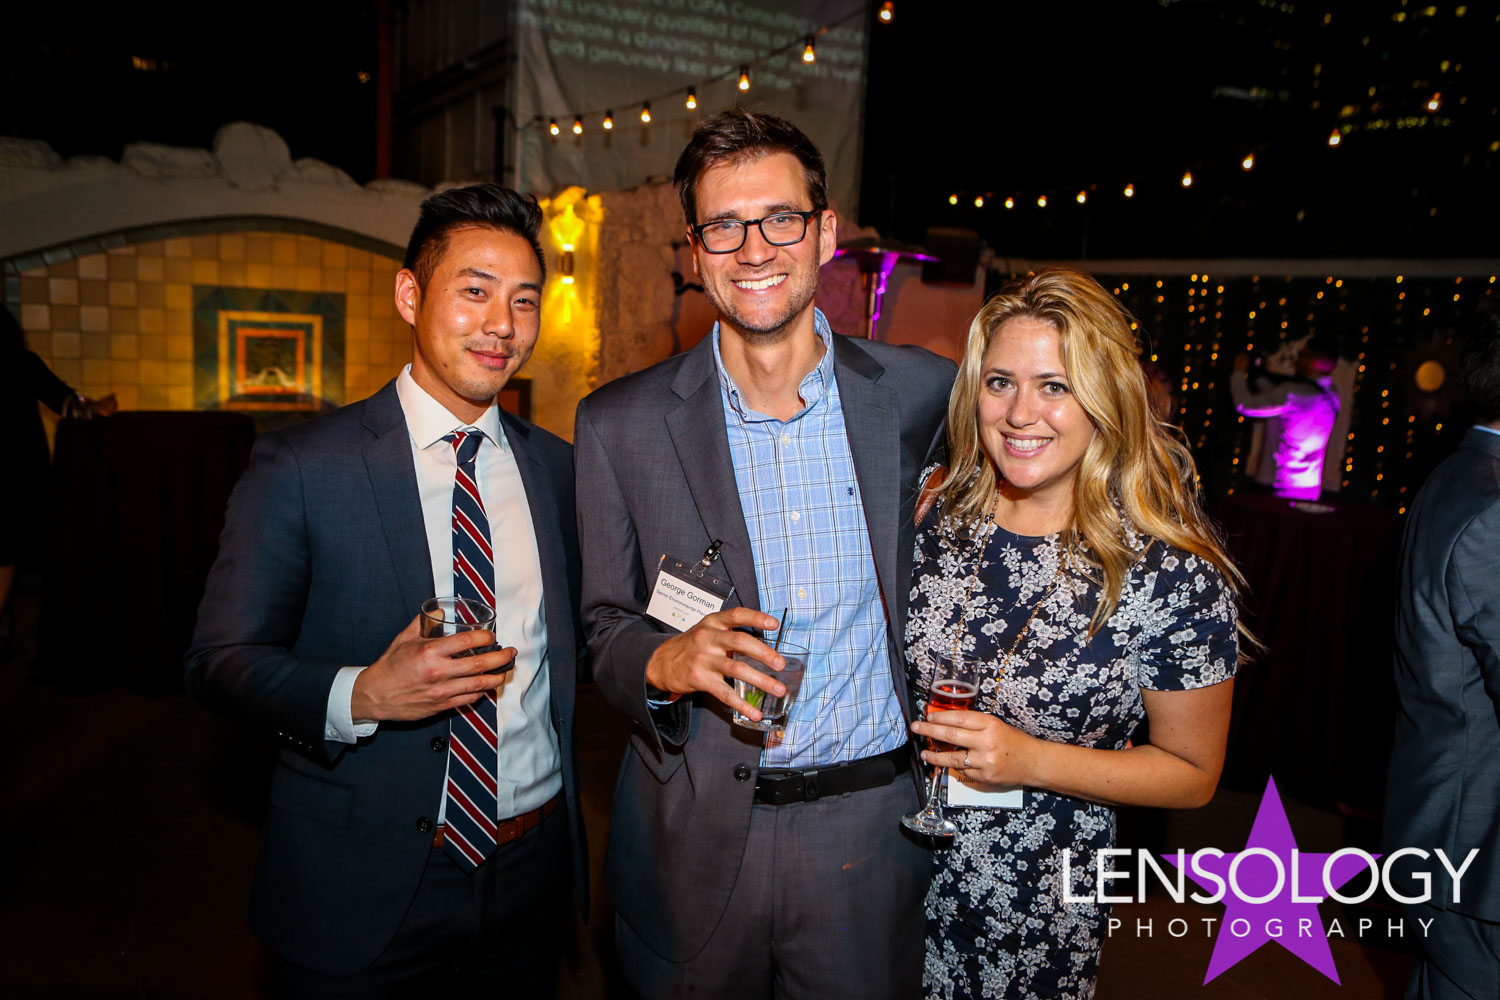 LENSOLOGY.NET - GPA Consulting corporate party, LA, CA.
All images are copyright of Lensology.net
Email: info@lensology.net
www.lensology.net